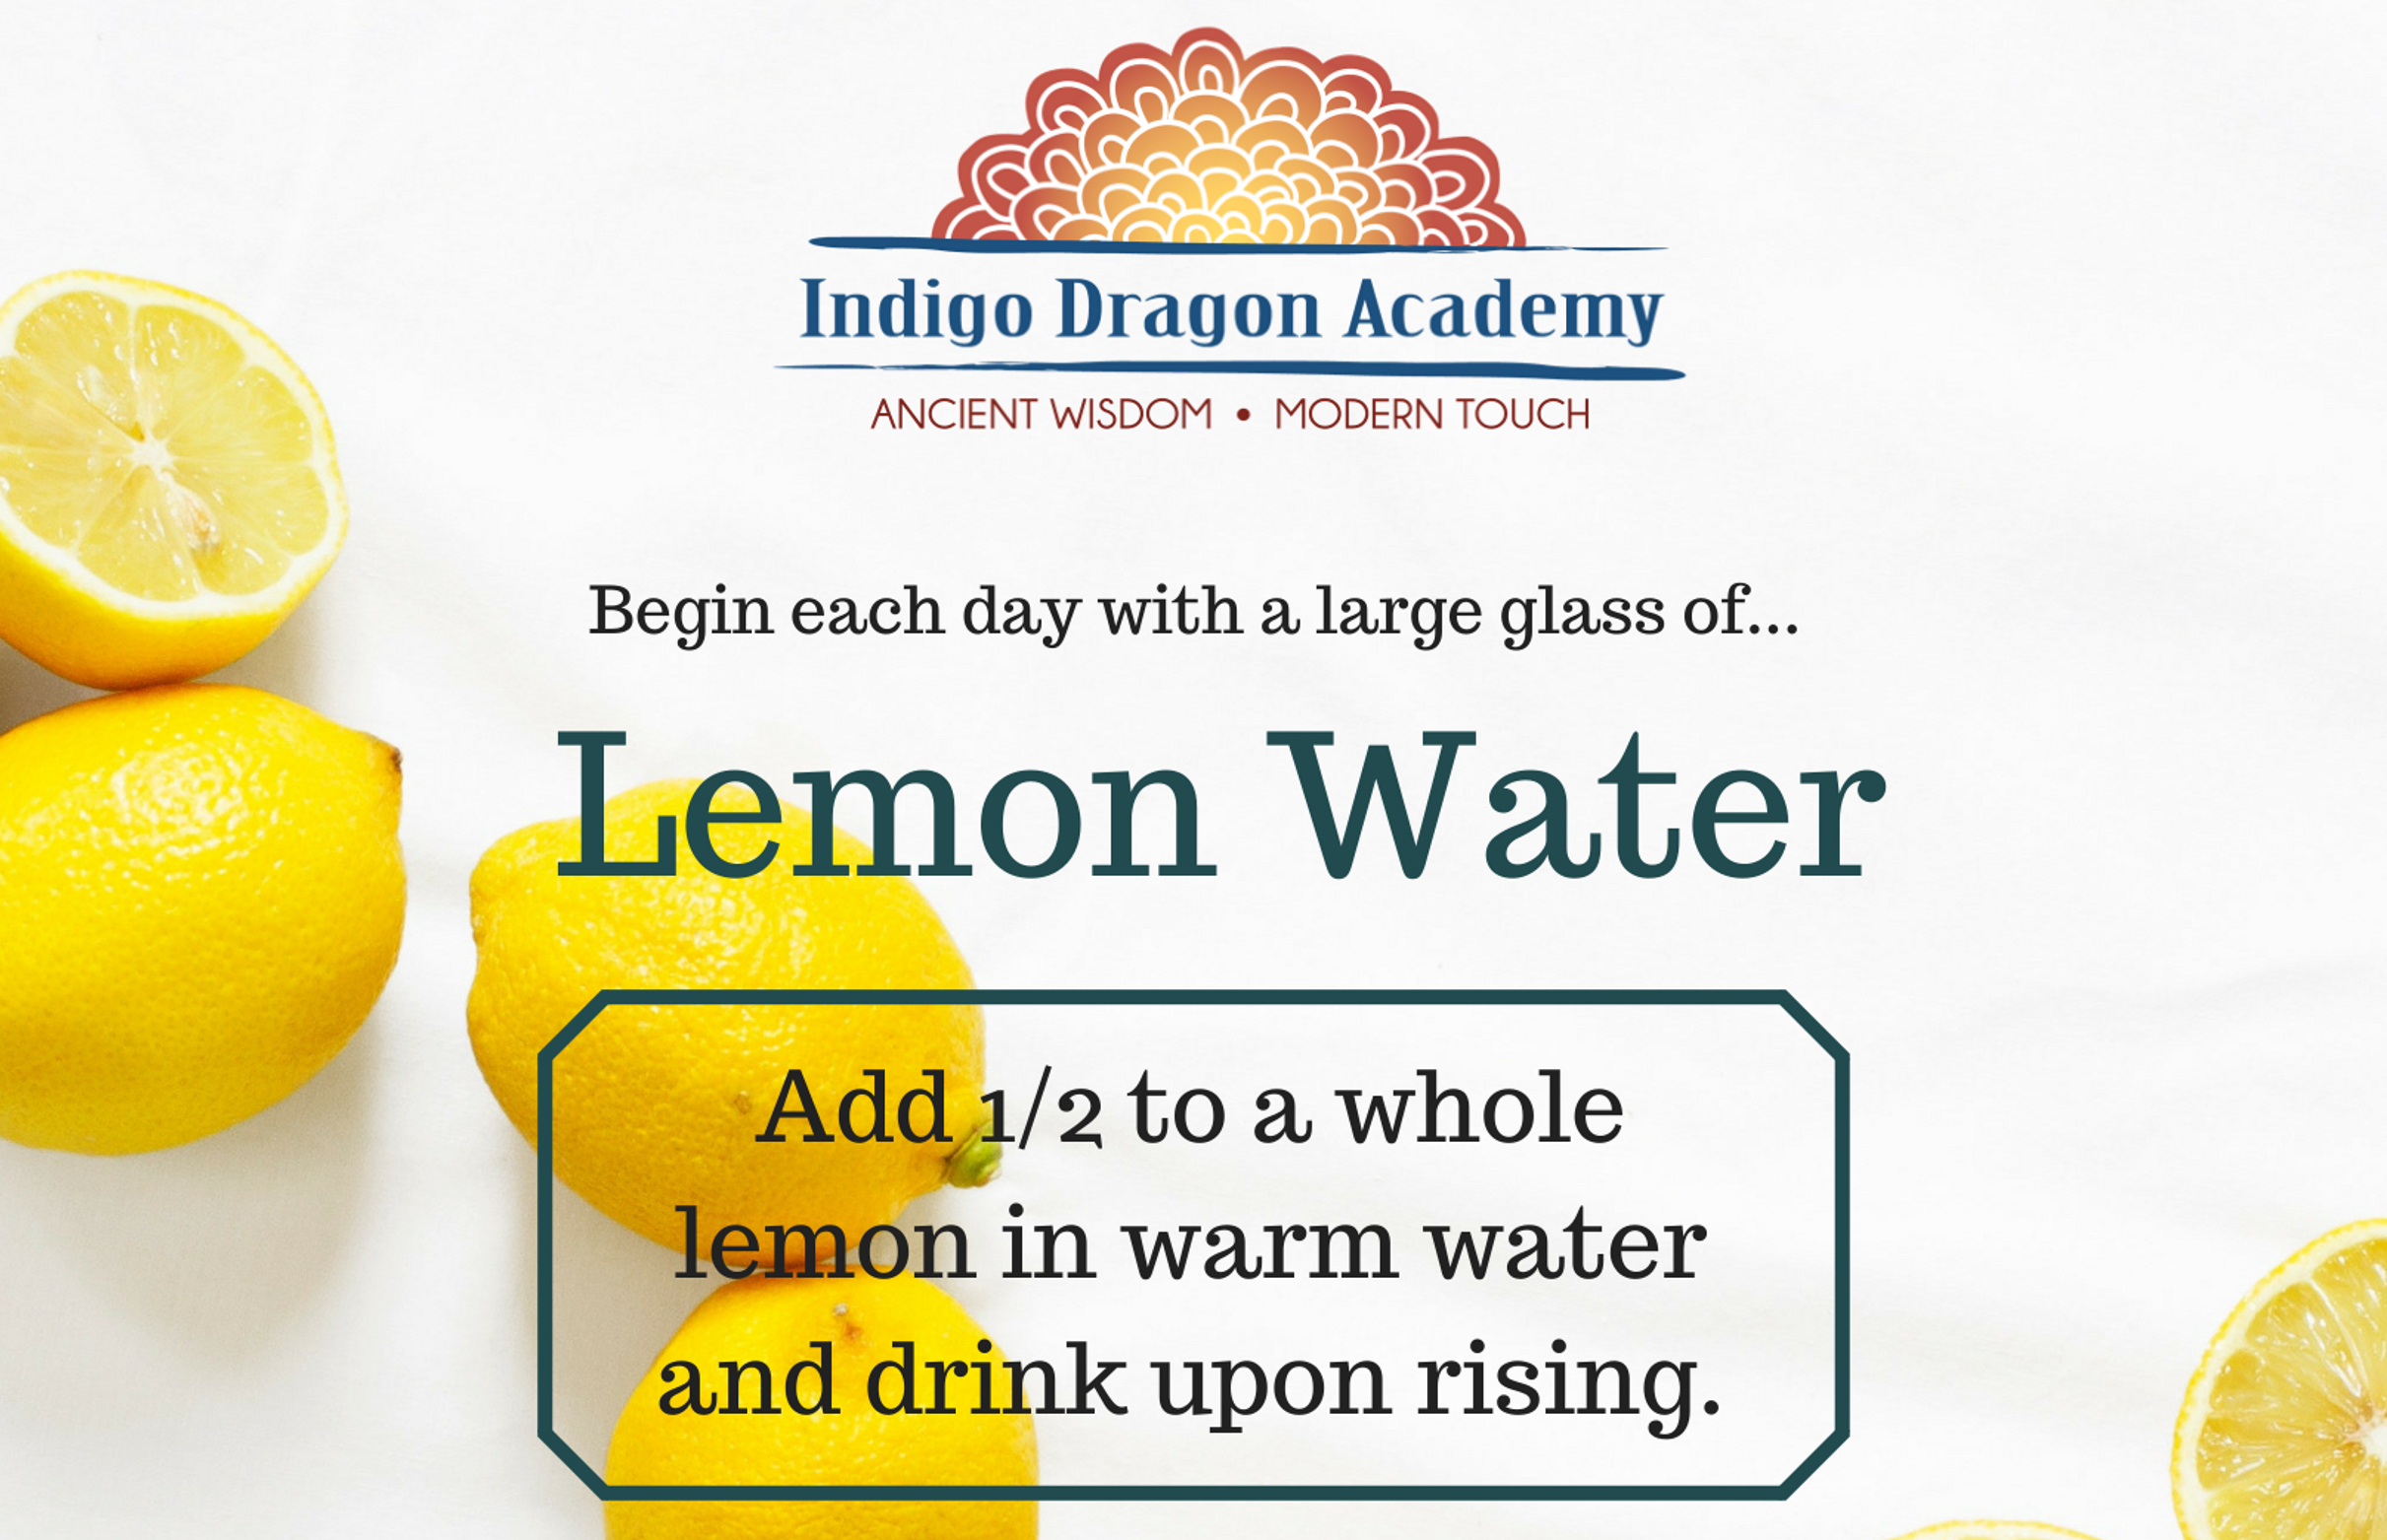 Start Each Day Witha large Warm Glass of Lemon Water